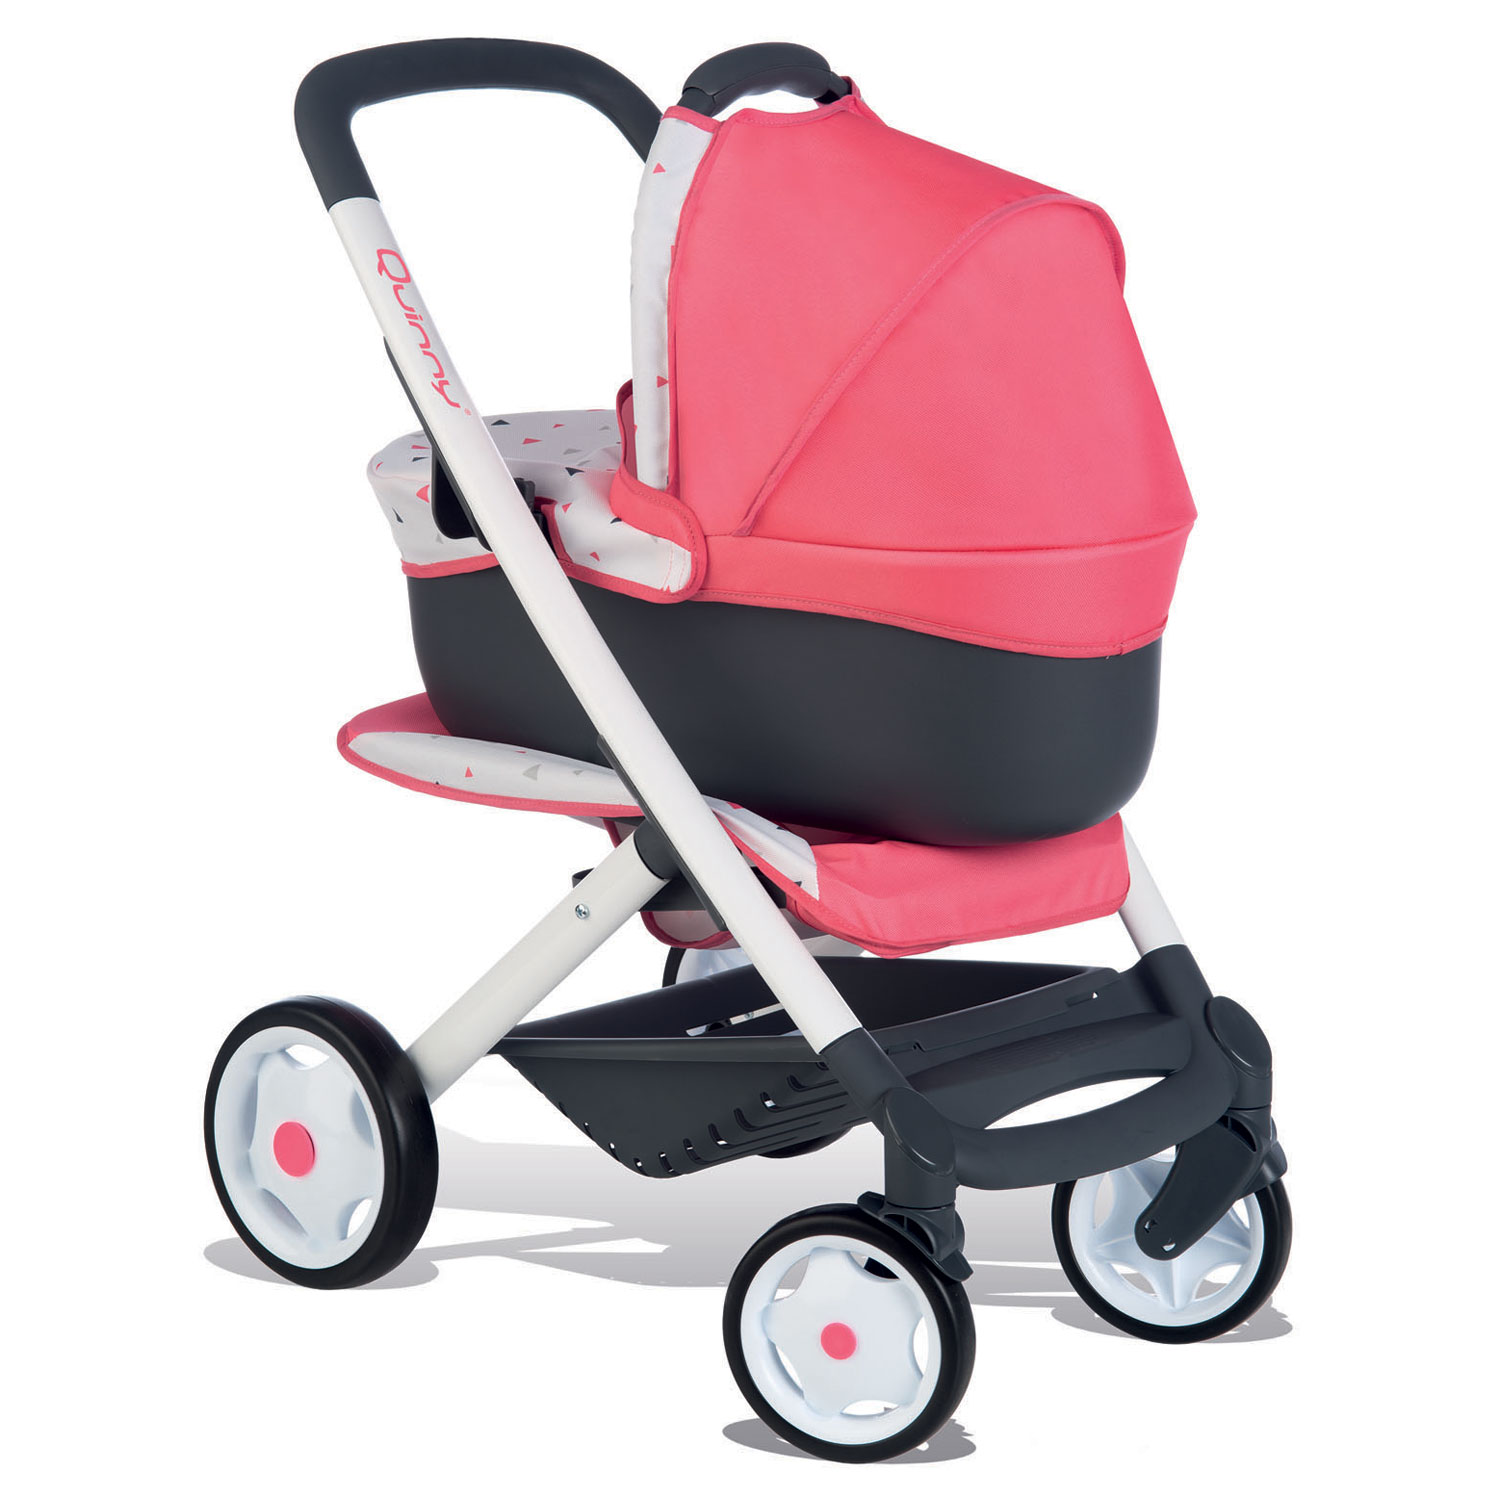 Smoby Quinny 3in1 Wandelwagen | Thimble